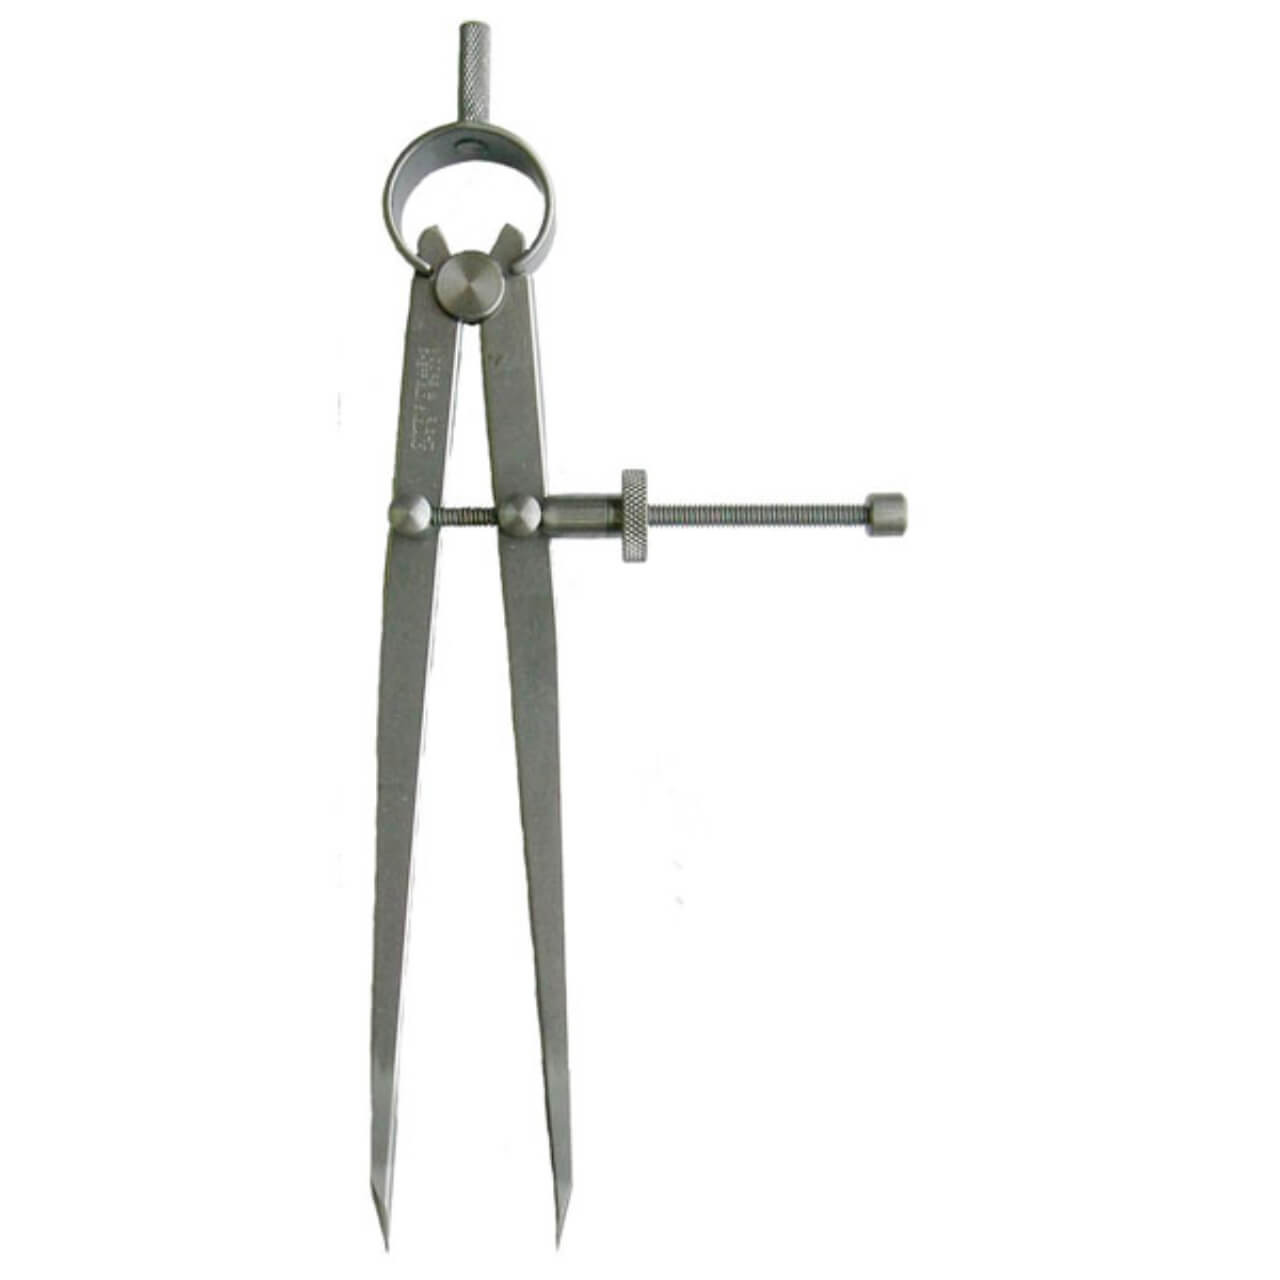 Moore & Wright 150mm (6”) Dividers Spring Joint Caliper